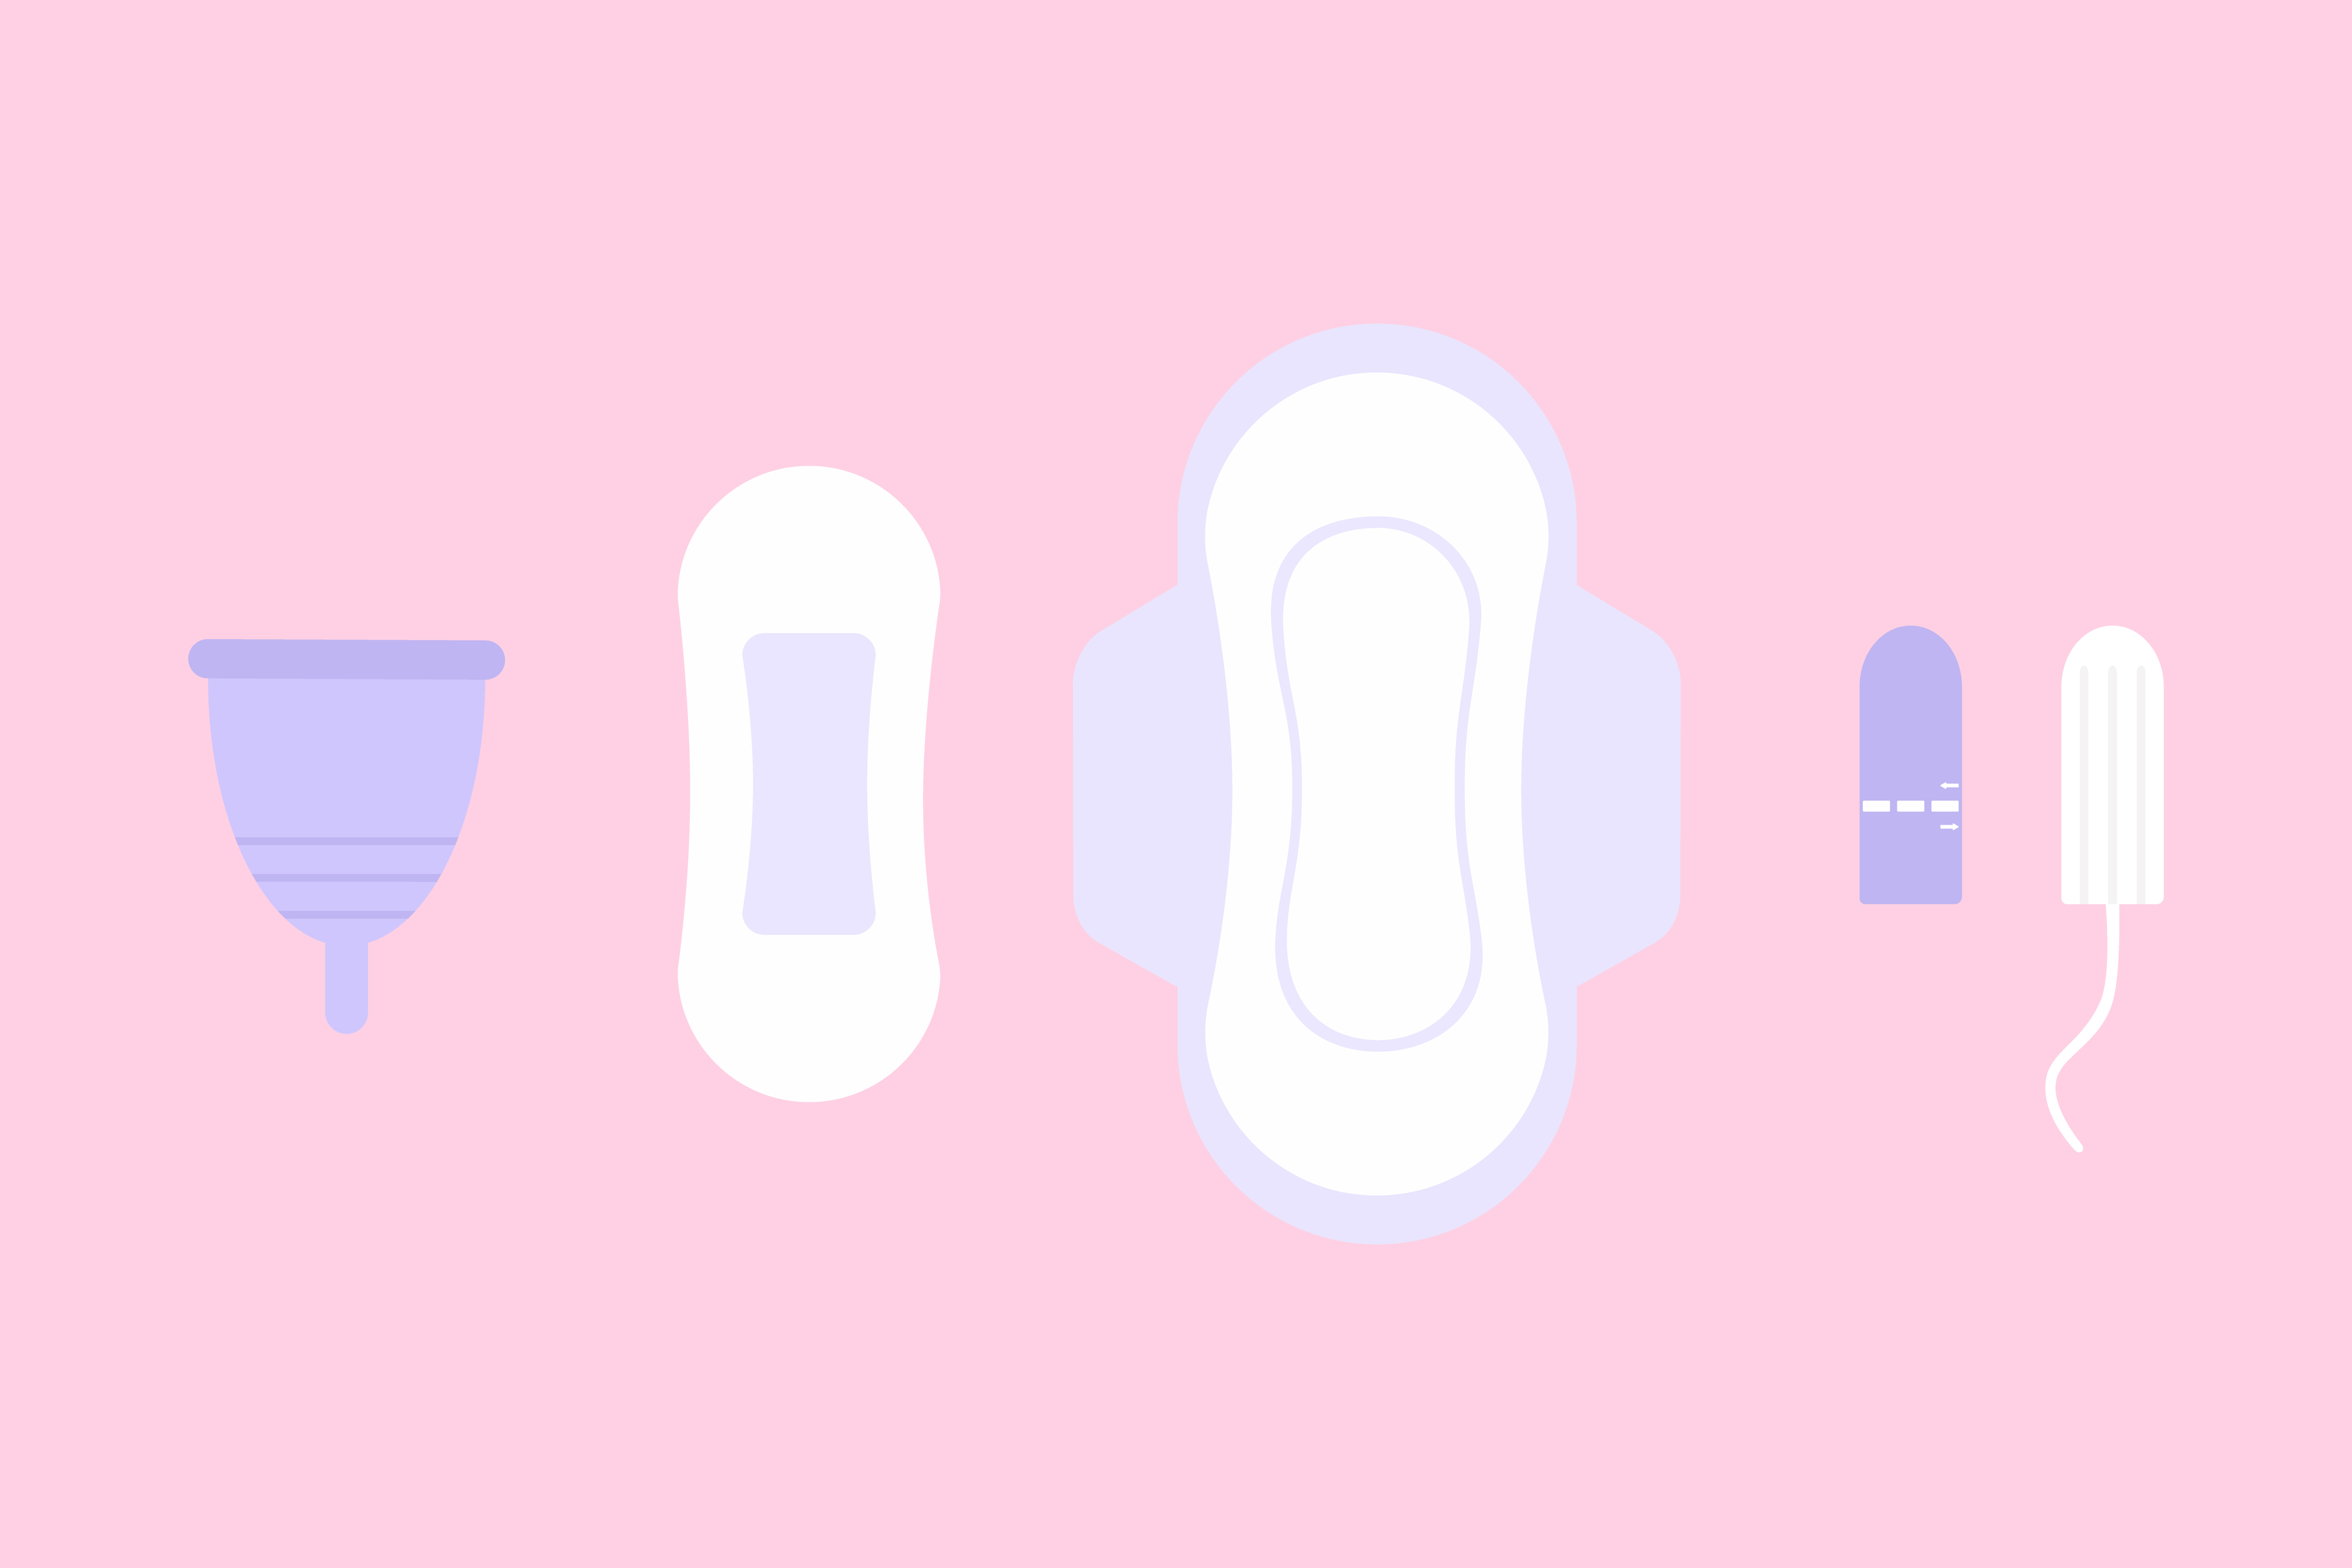 A graphic showing a menstrual cup, a pantyliner, a sanitary towel and a tampon